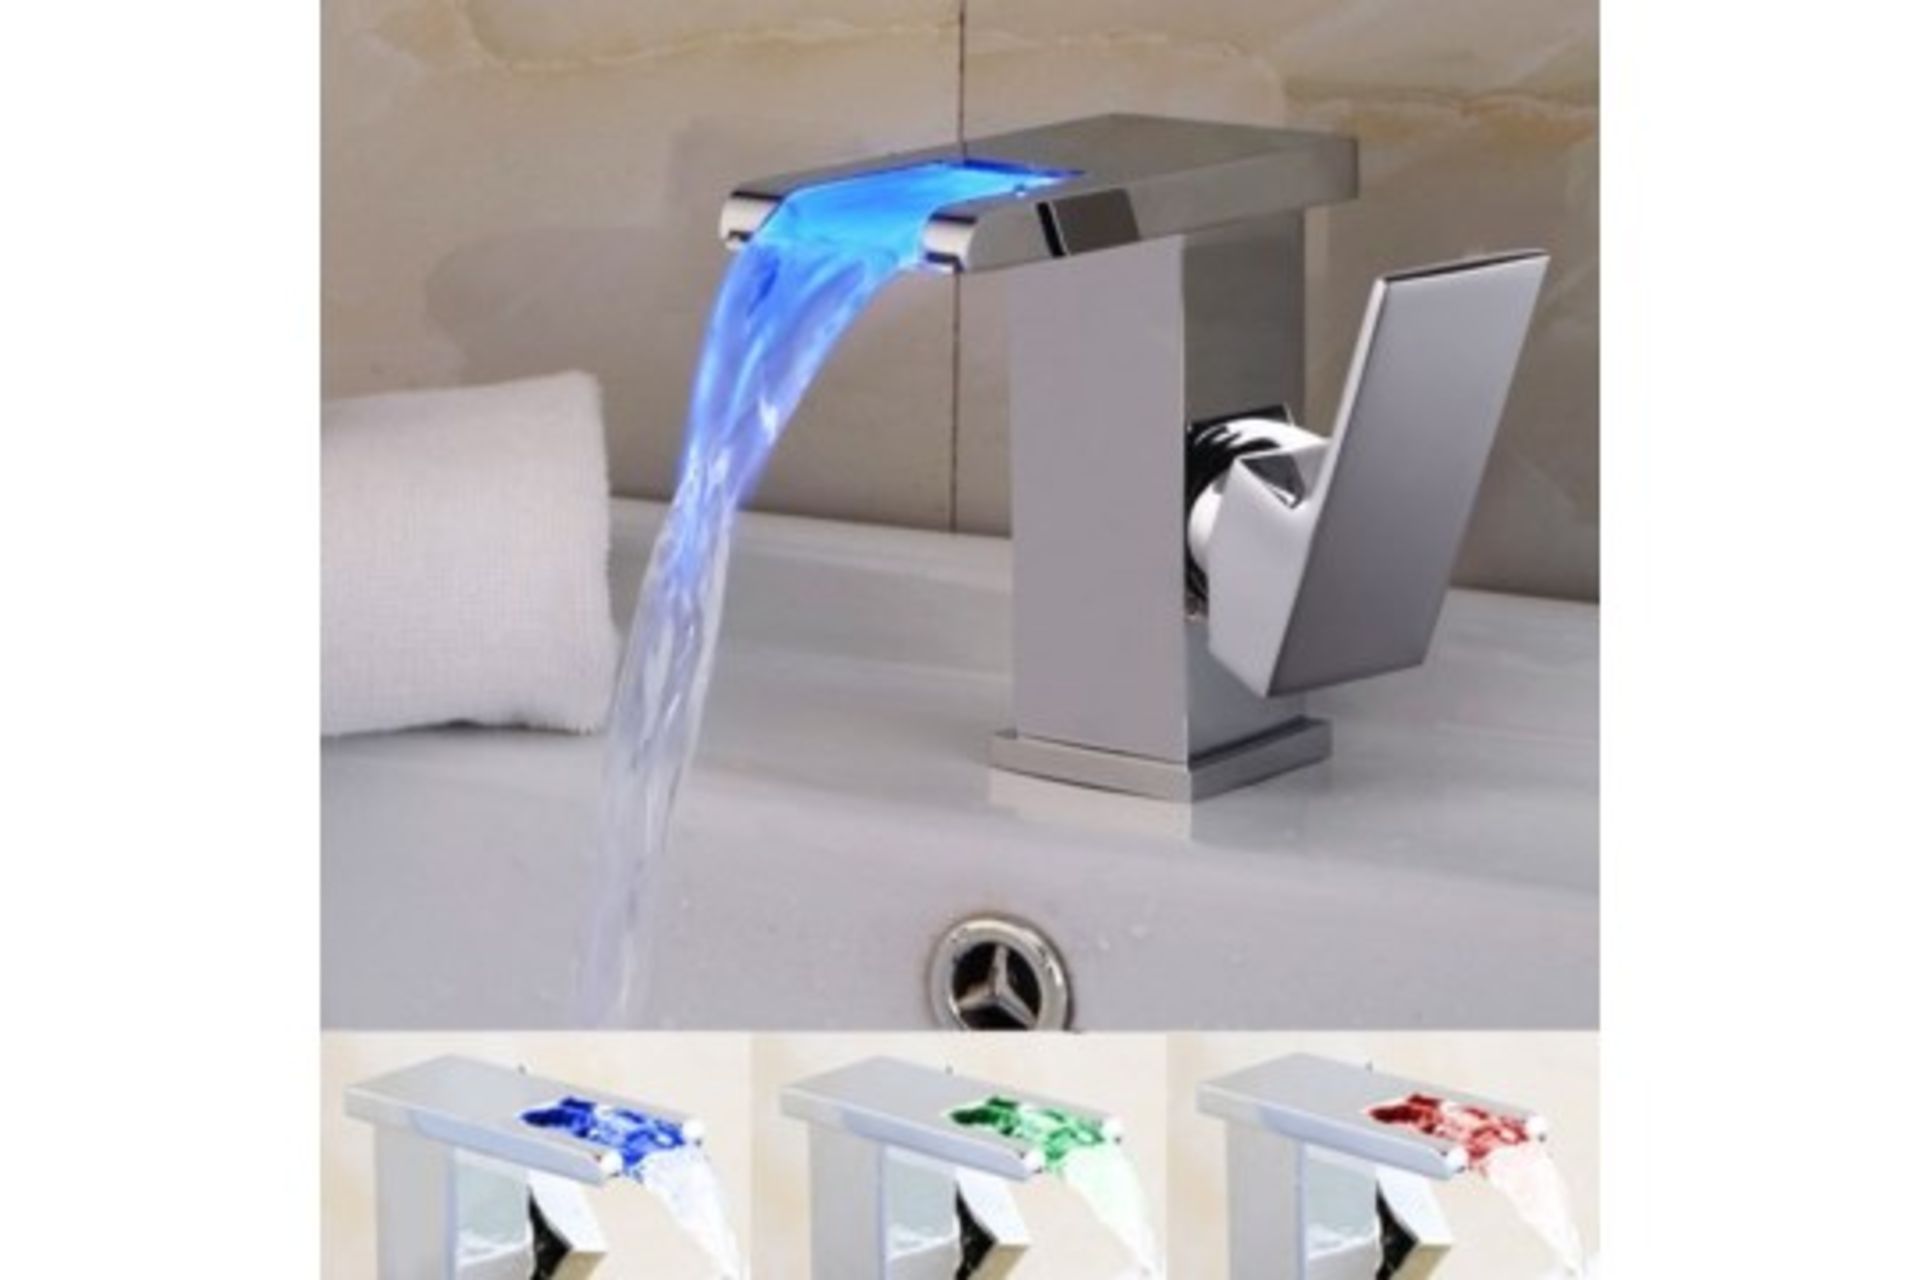 LED Waterfall Bathroom Basin Mixer Tap. RRP £229.99.Easy to install and clean. All copper m...